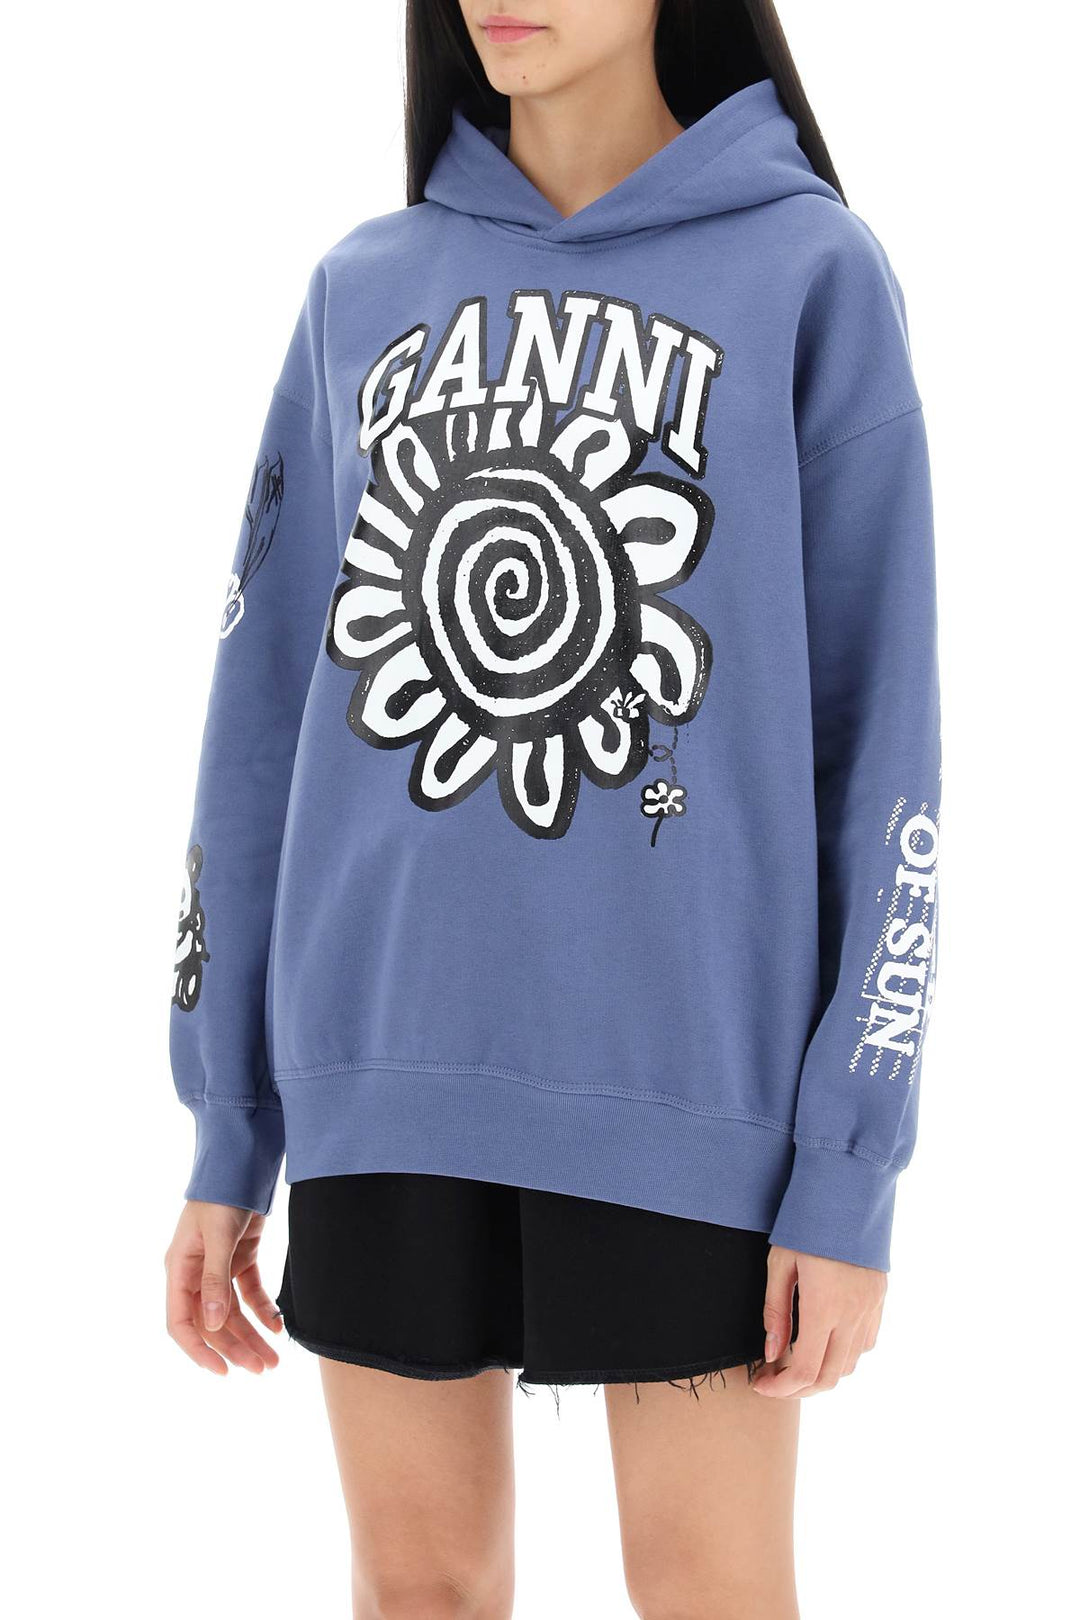 Ganni Hoodie With Graphic Prints   Celeste